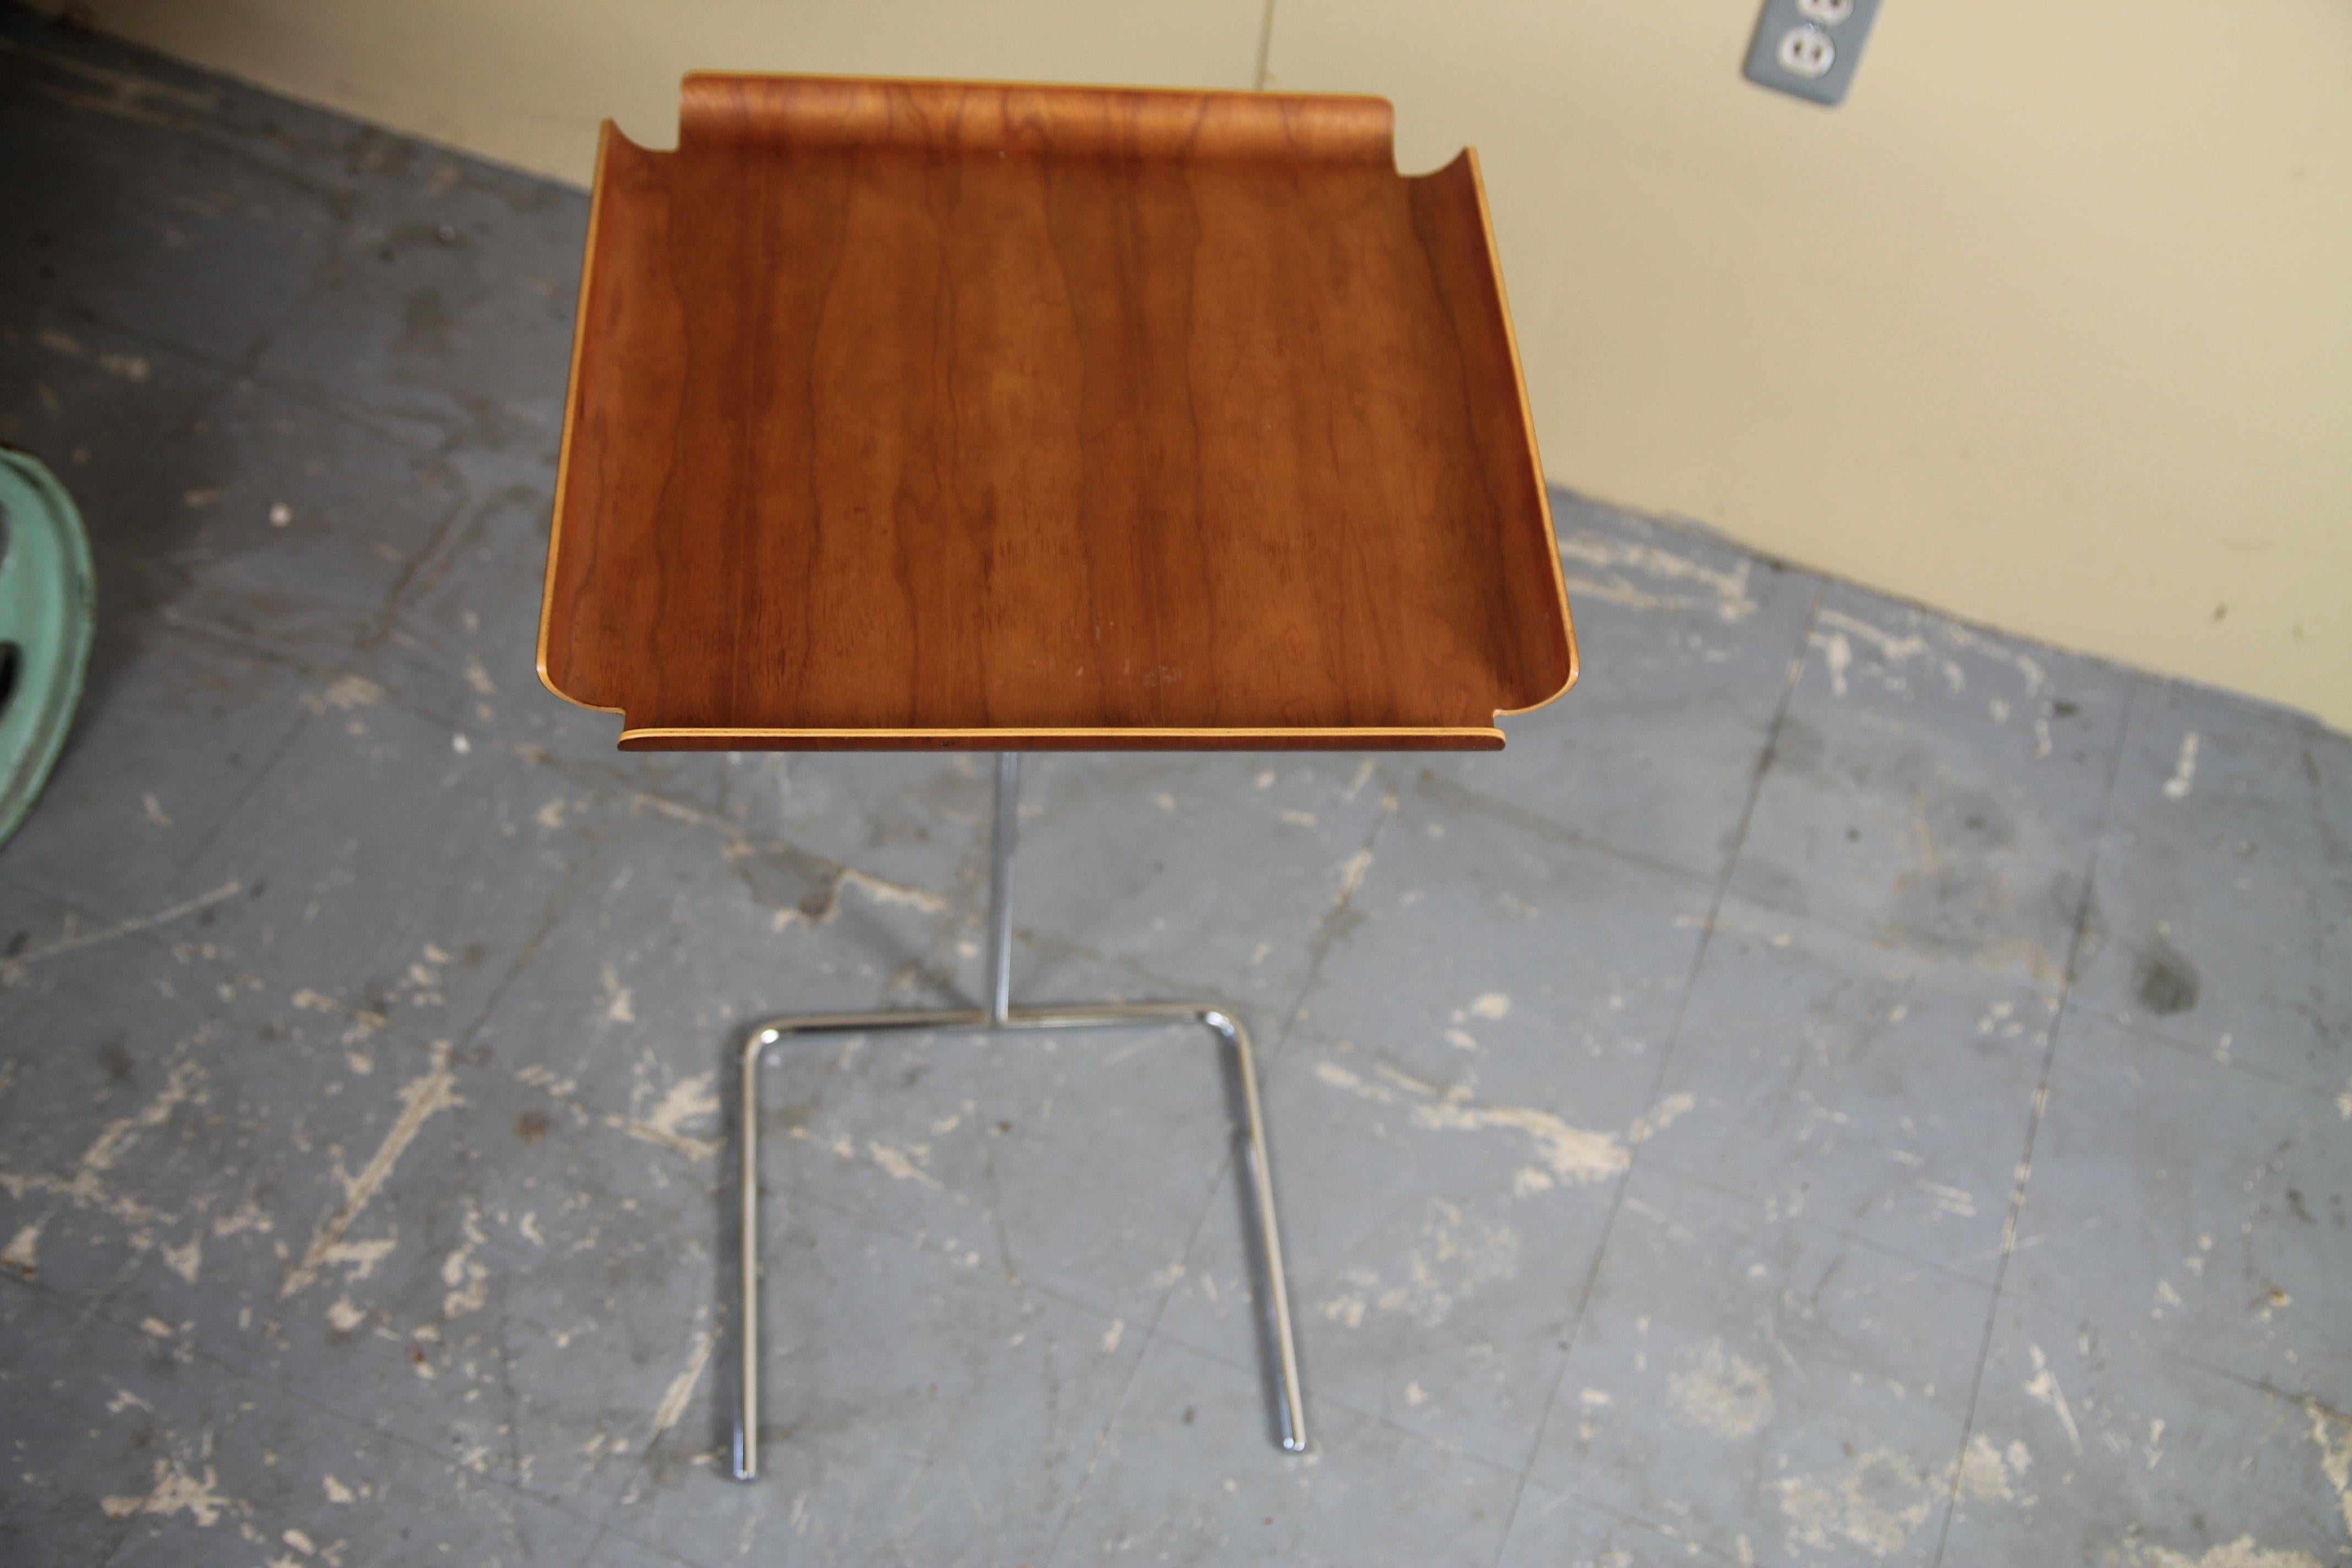 Adjustable tray table by George Nelson. Table is no longer in production. Table adjusts from 15.5 to 32 inches high. Also made to slide under a chair or couch so it extends over the piece of furniture.